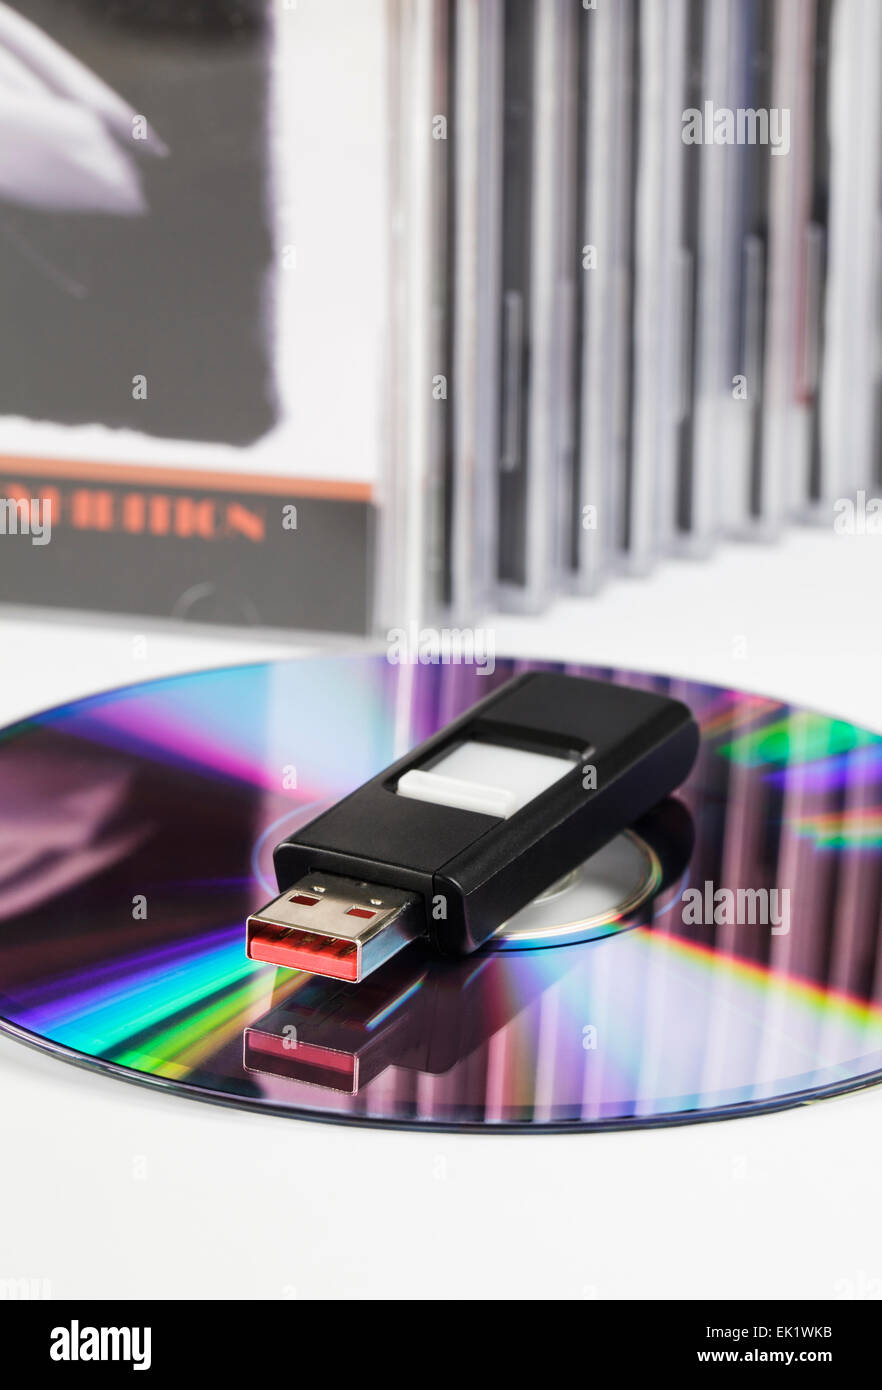 One USB Flash drive and a stack of DVD's Stock Photo